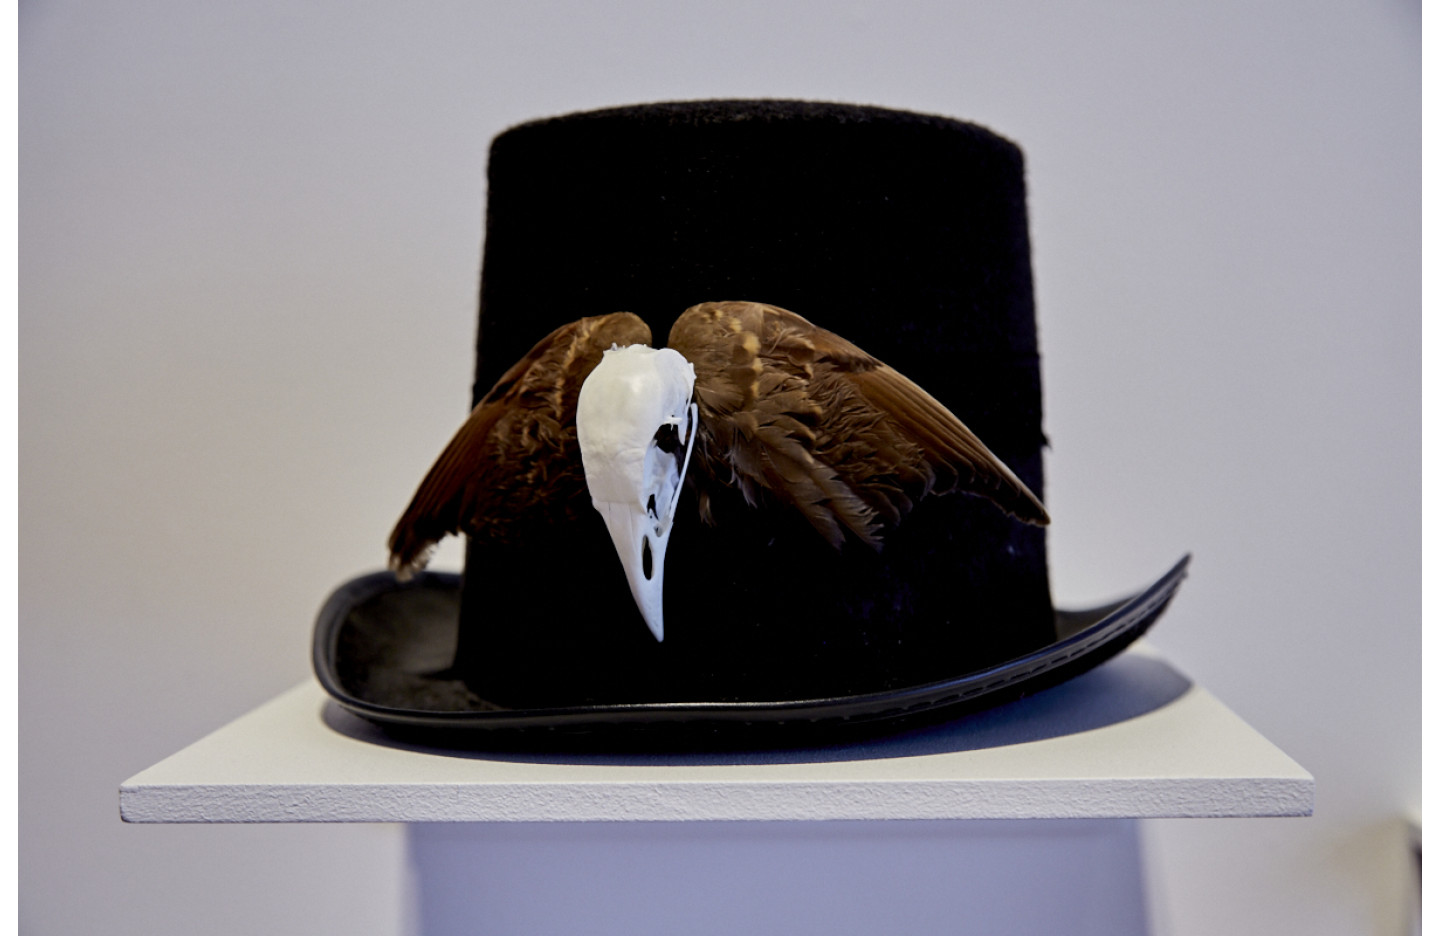 Loux McLellan, Tophat with pukeko and sparrow - for ThreeD Words: An exhibition of NZ women comic makers, Ramp Gallery, 31 Oct - 15 Nov, 2016